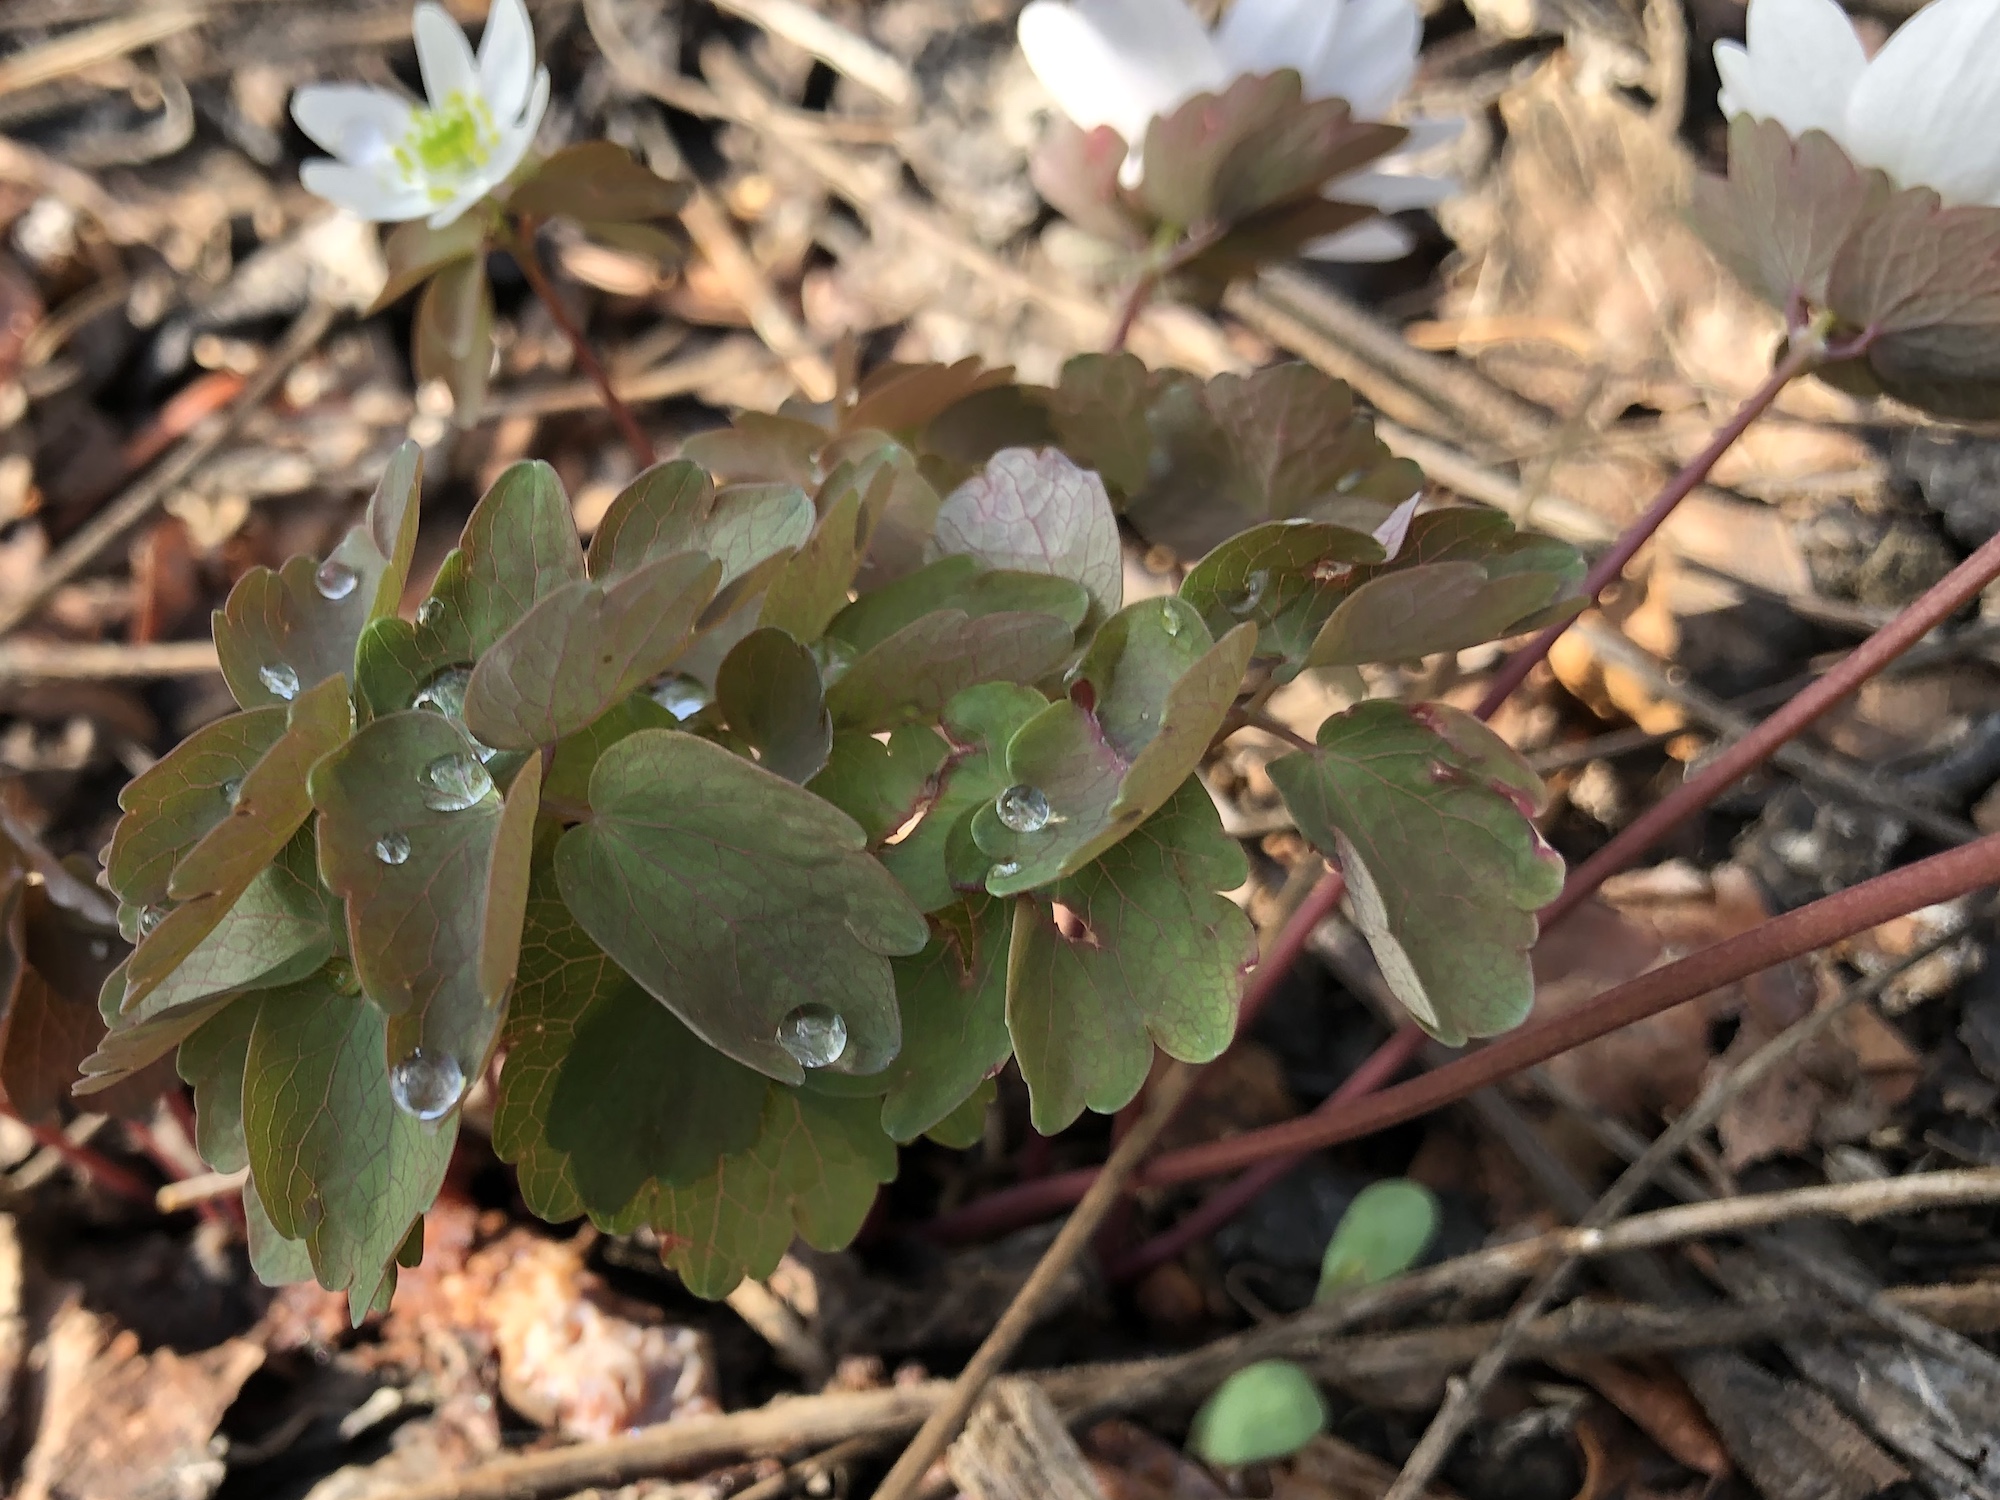 Rue-anemone leaves near Agawa Path in Madison, Wisconsin on April 12, 2021.